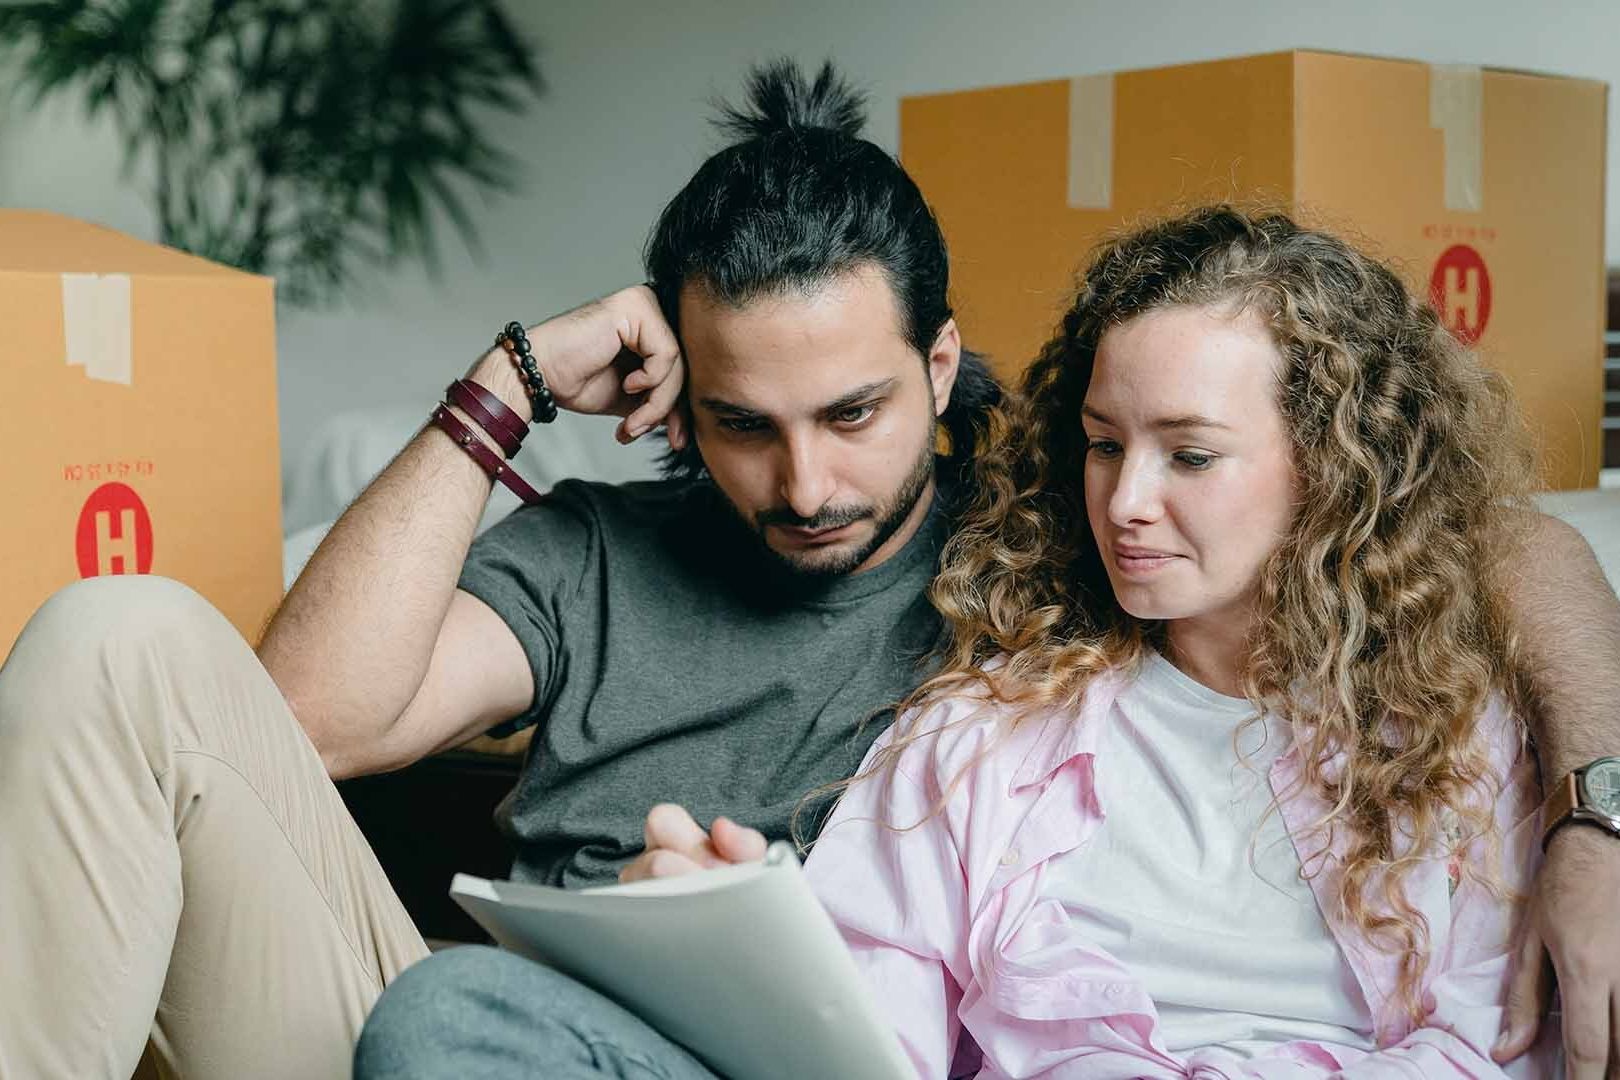 Couple sitting on couch surrounded by boxes and looking at note pad